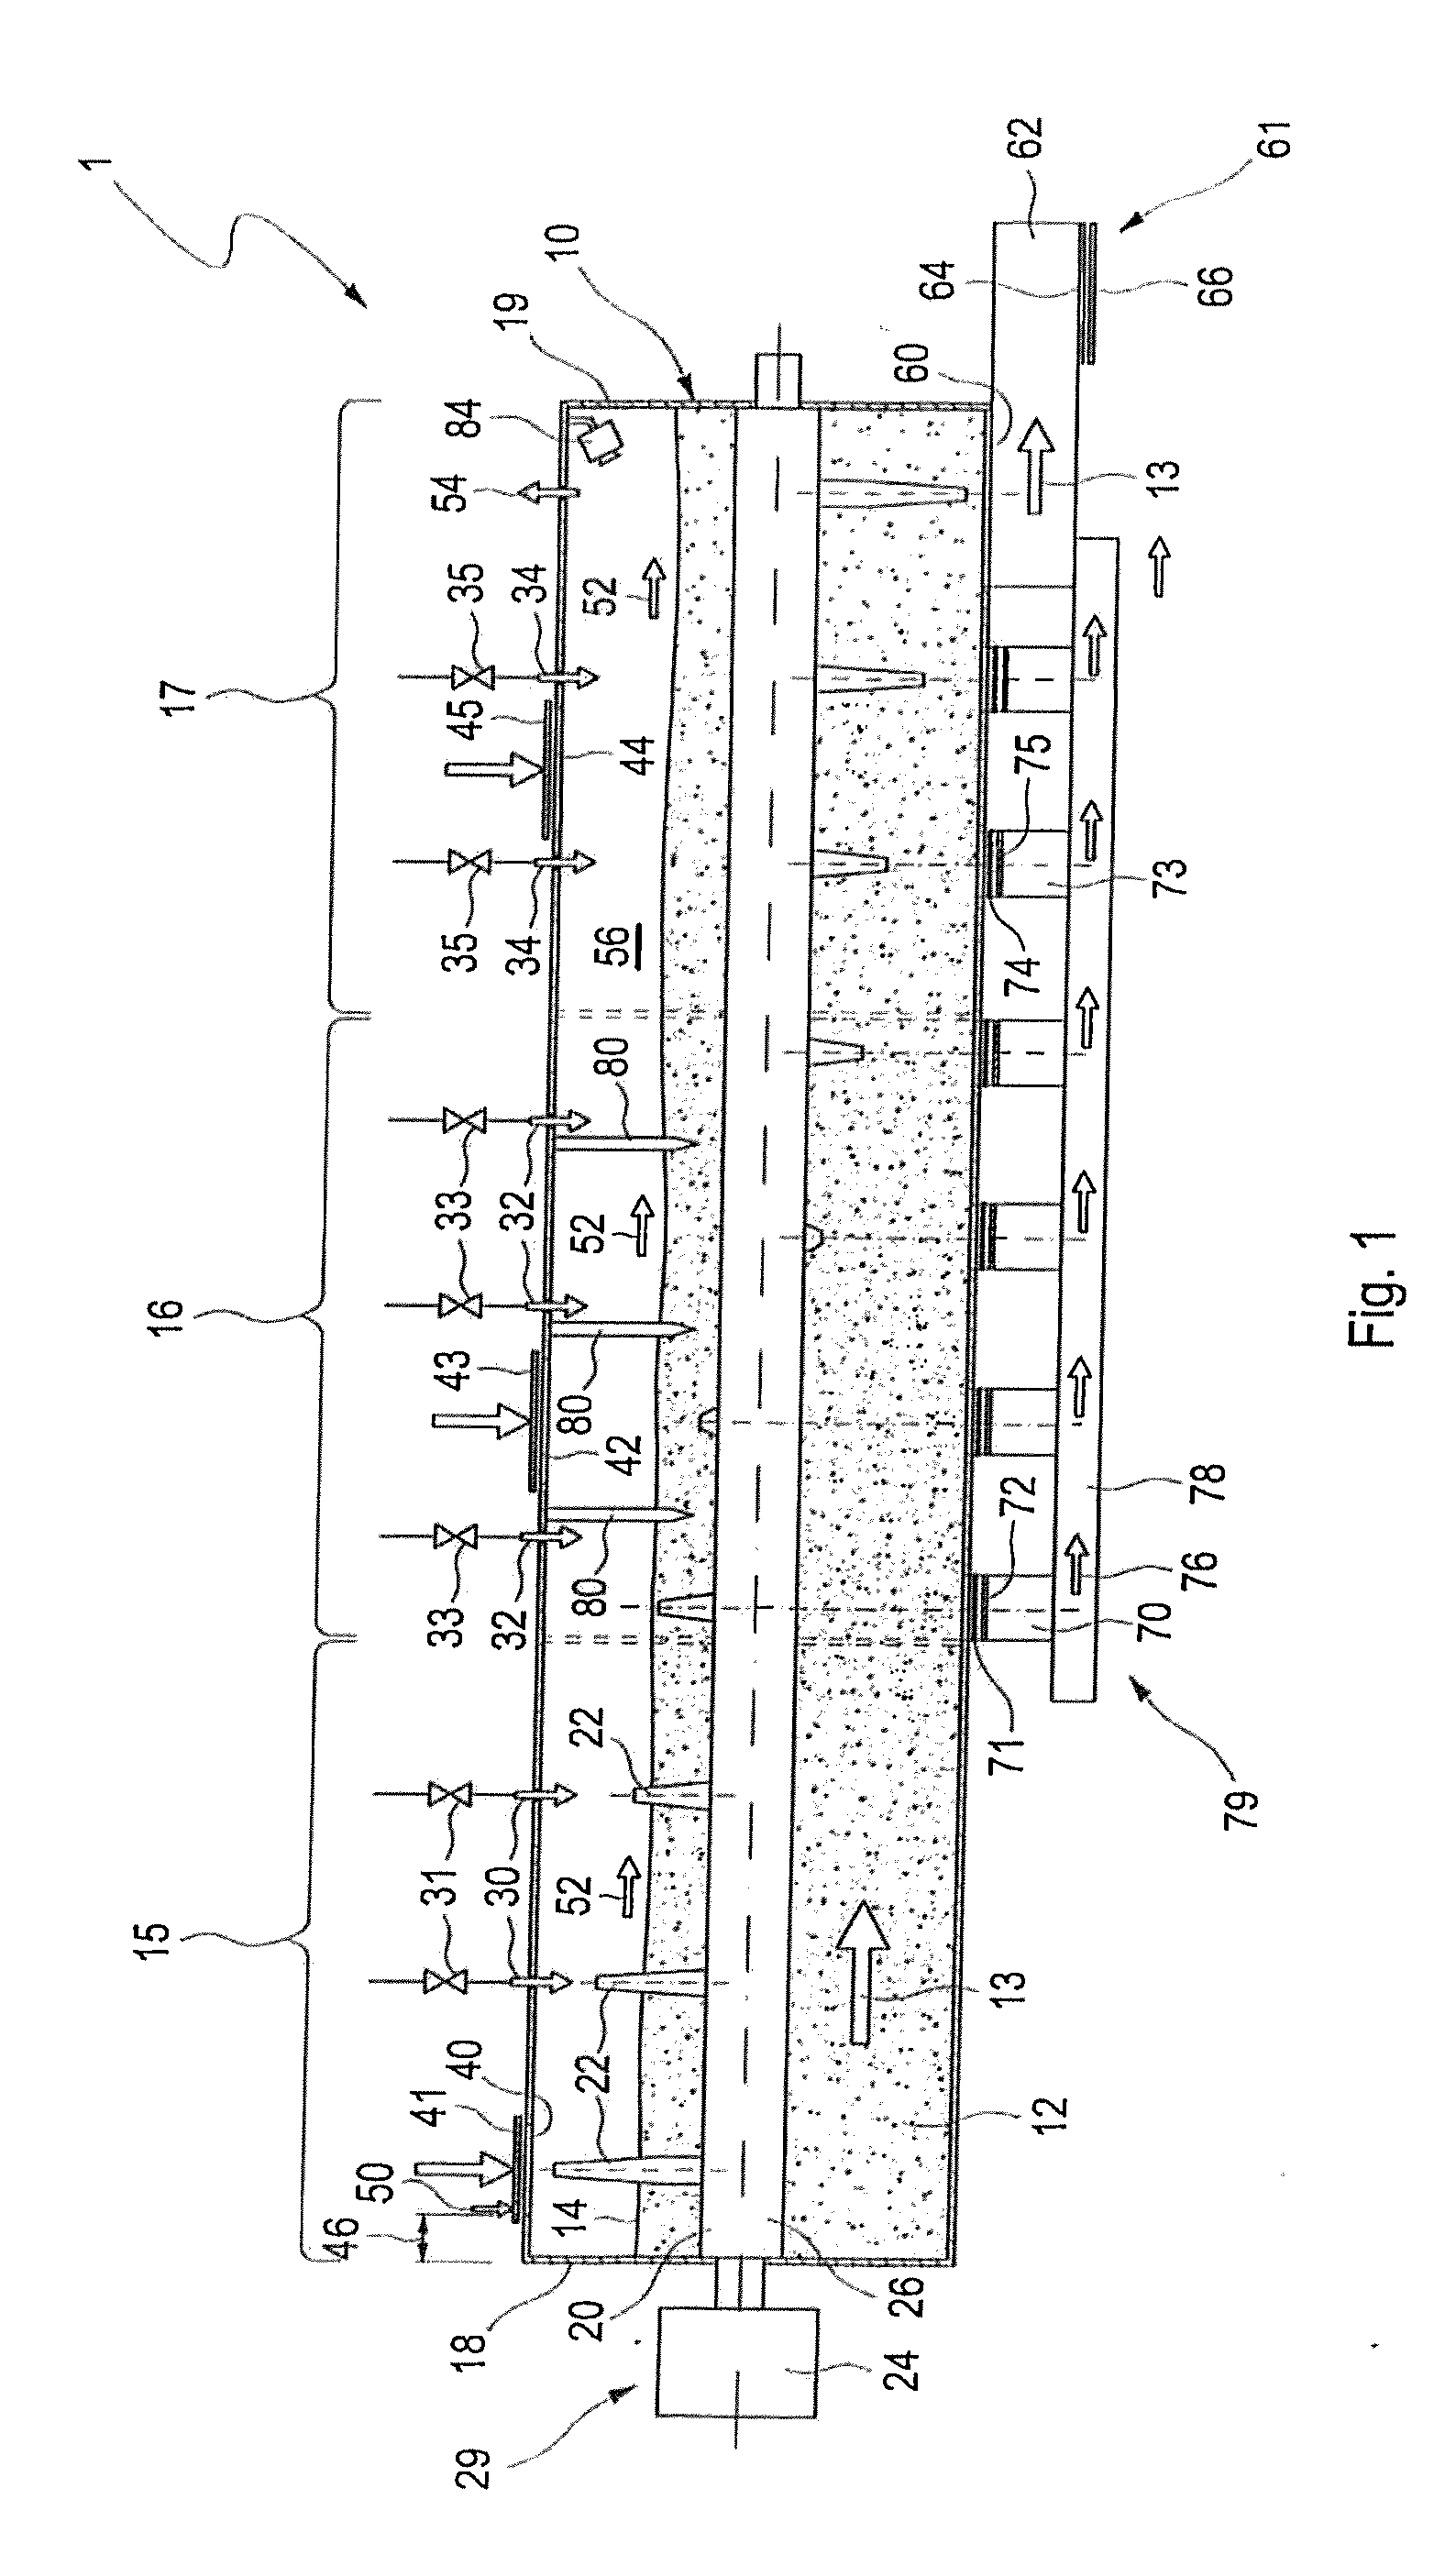 Method and Device for the Mechanical or Mechanical-Biological Treatment of Waste